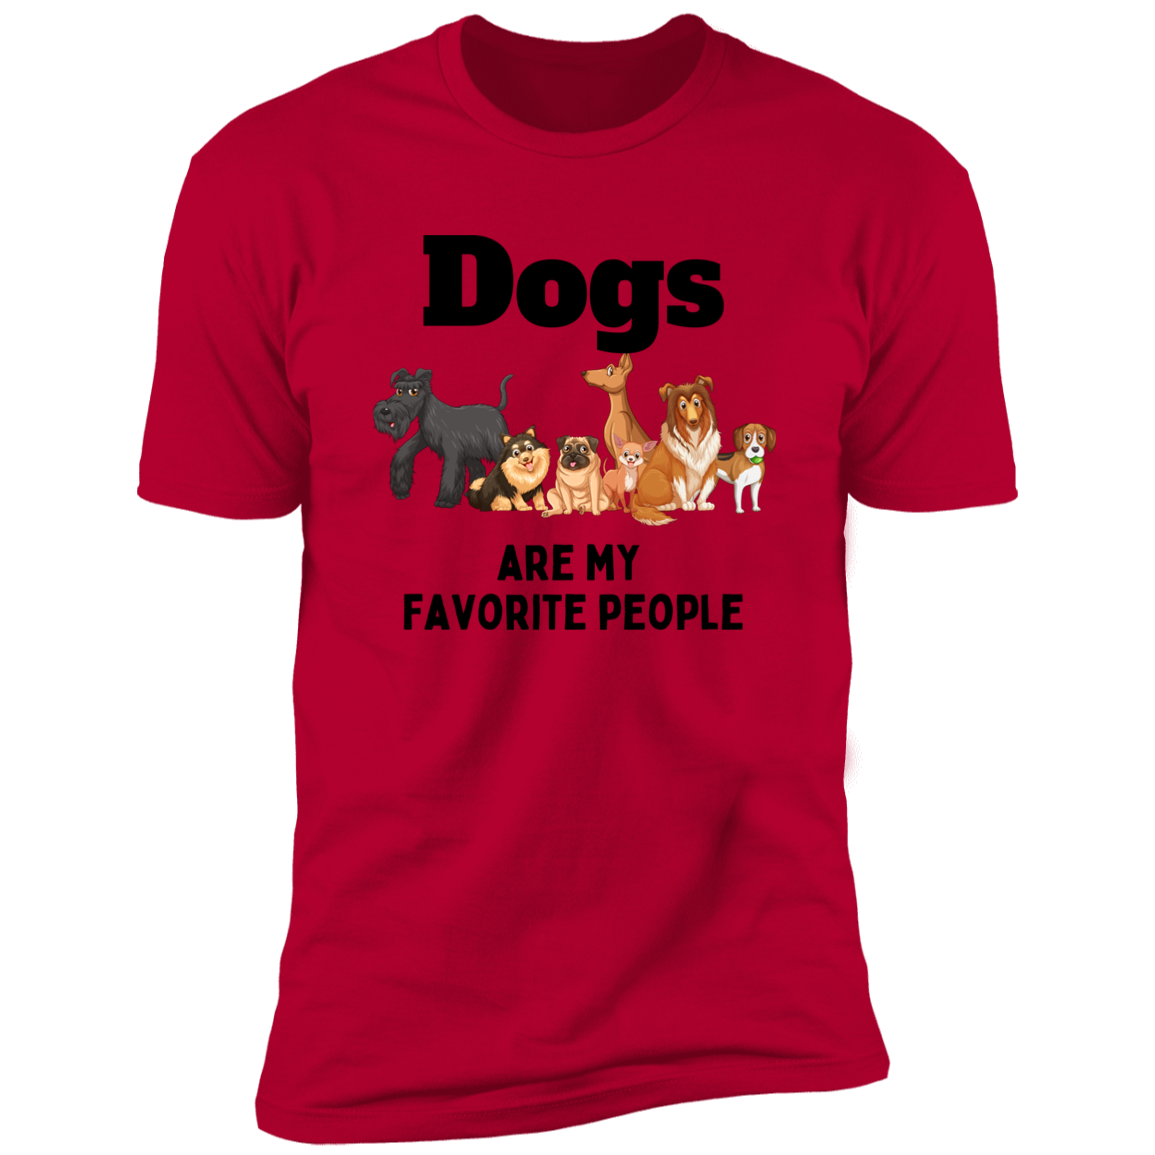 Dogs Are My Favorite People t-shirt, dog shirt for humans, in red